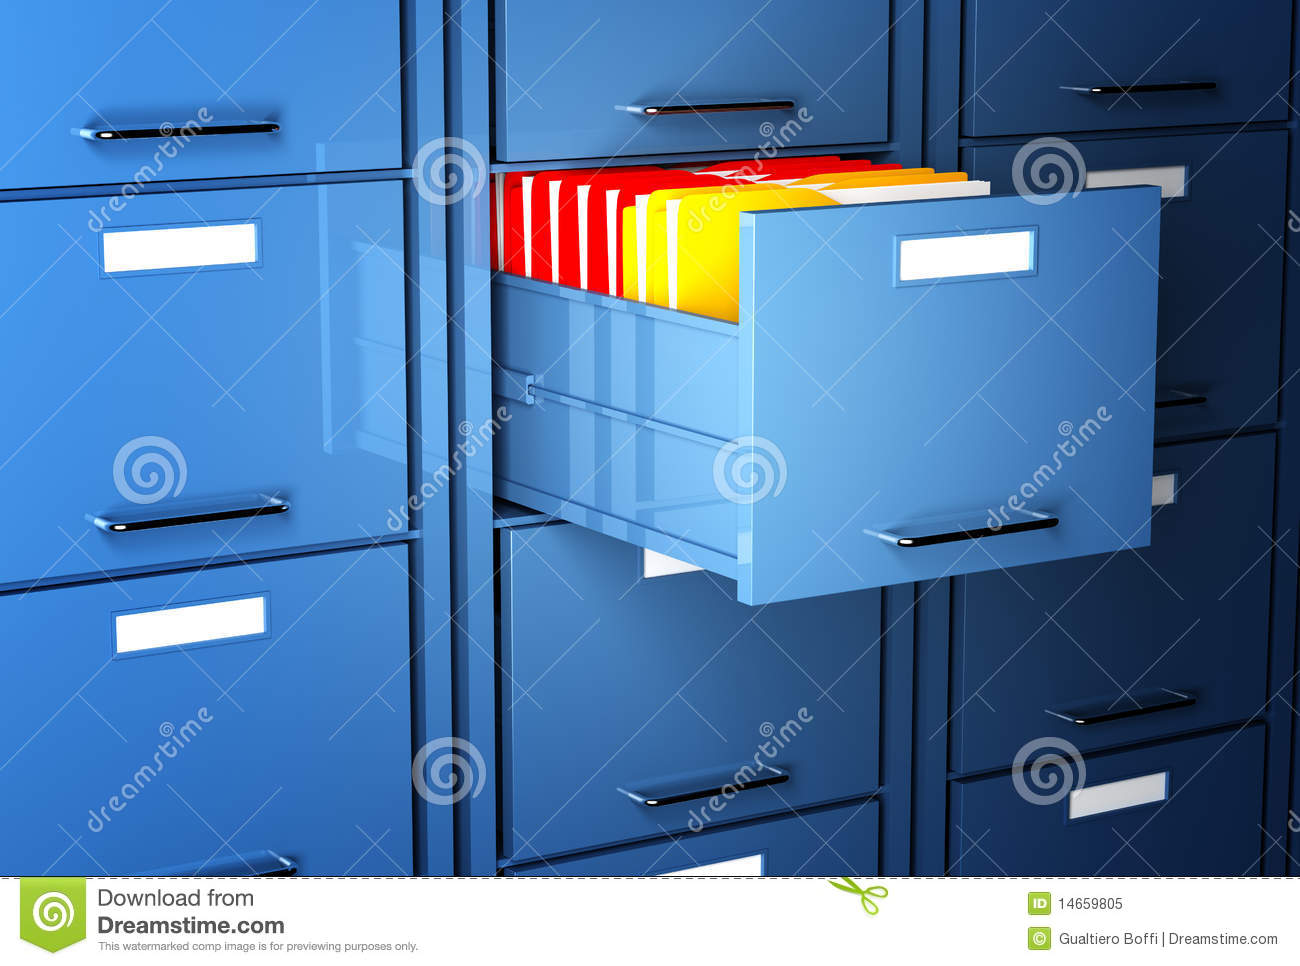 File Cabinet 3d Royalty Free Stock Photo   Image  14659805